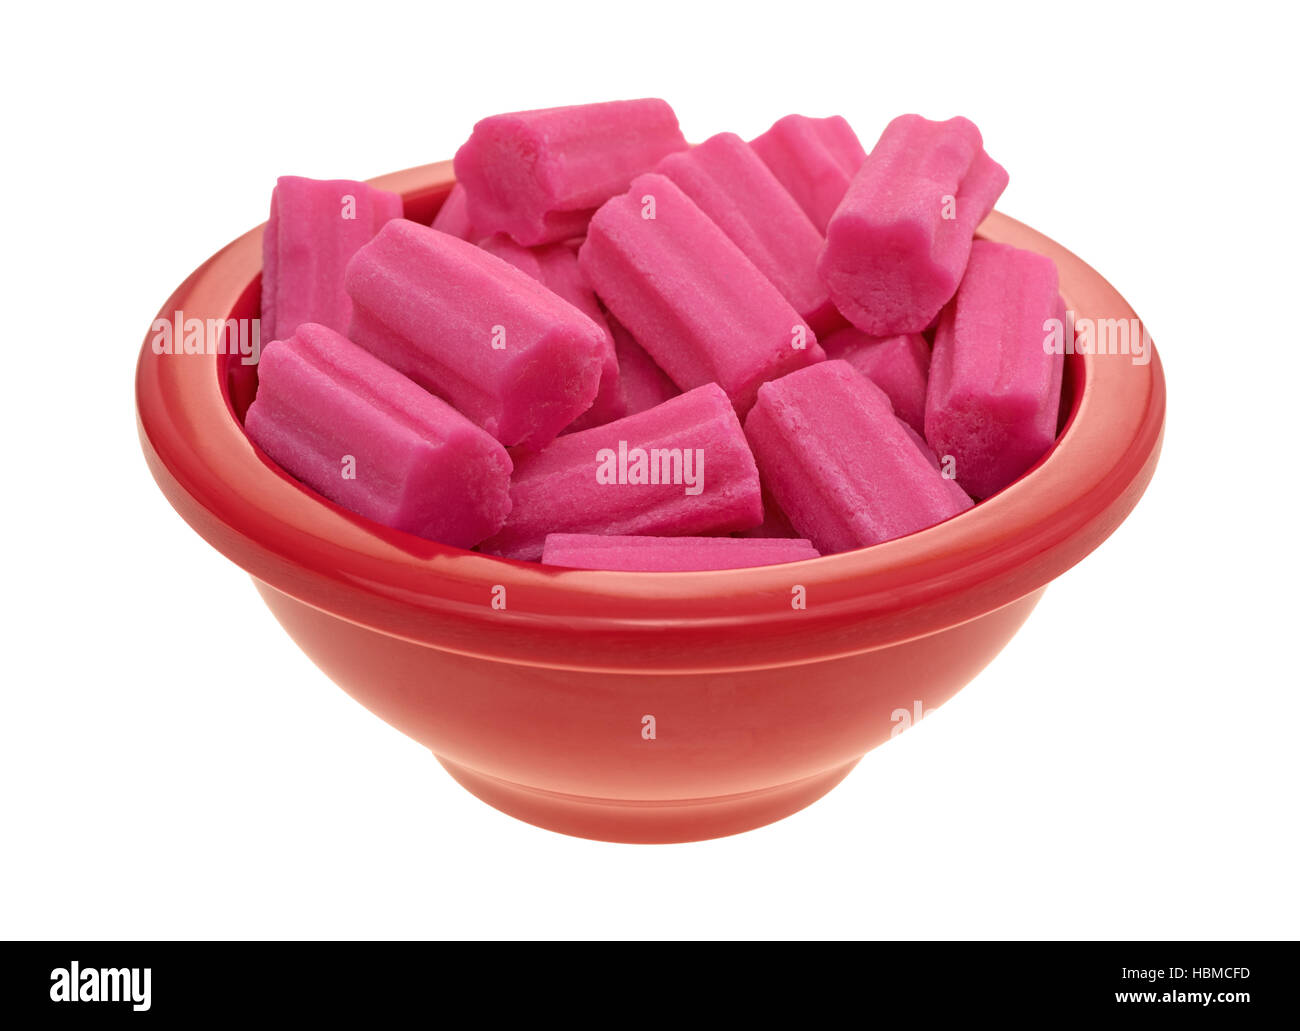 A small red bowl filled with pink bubble gum isolated on a white background. Stock Photo